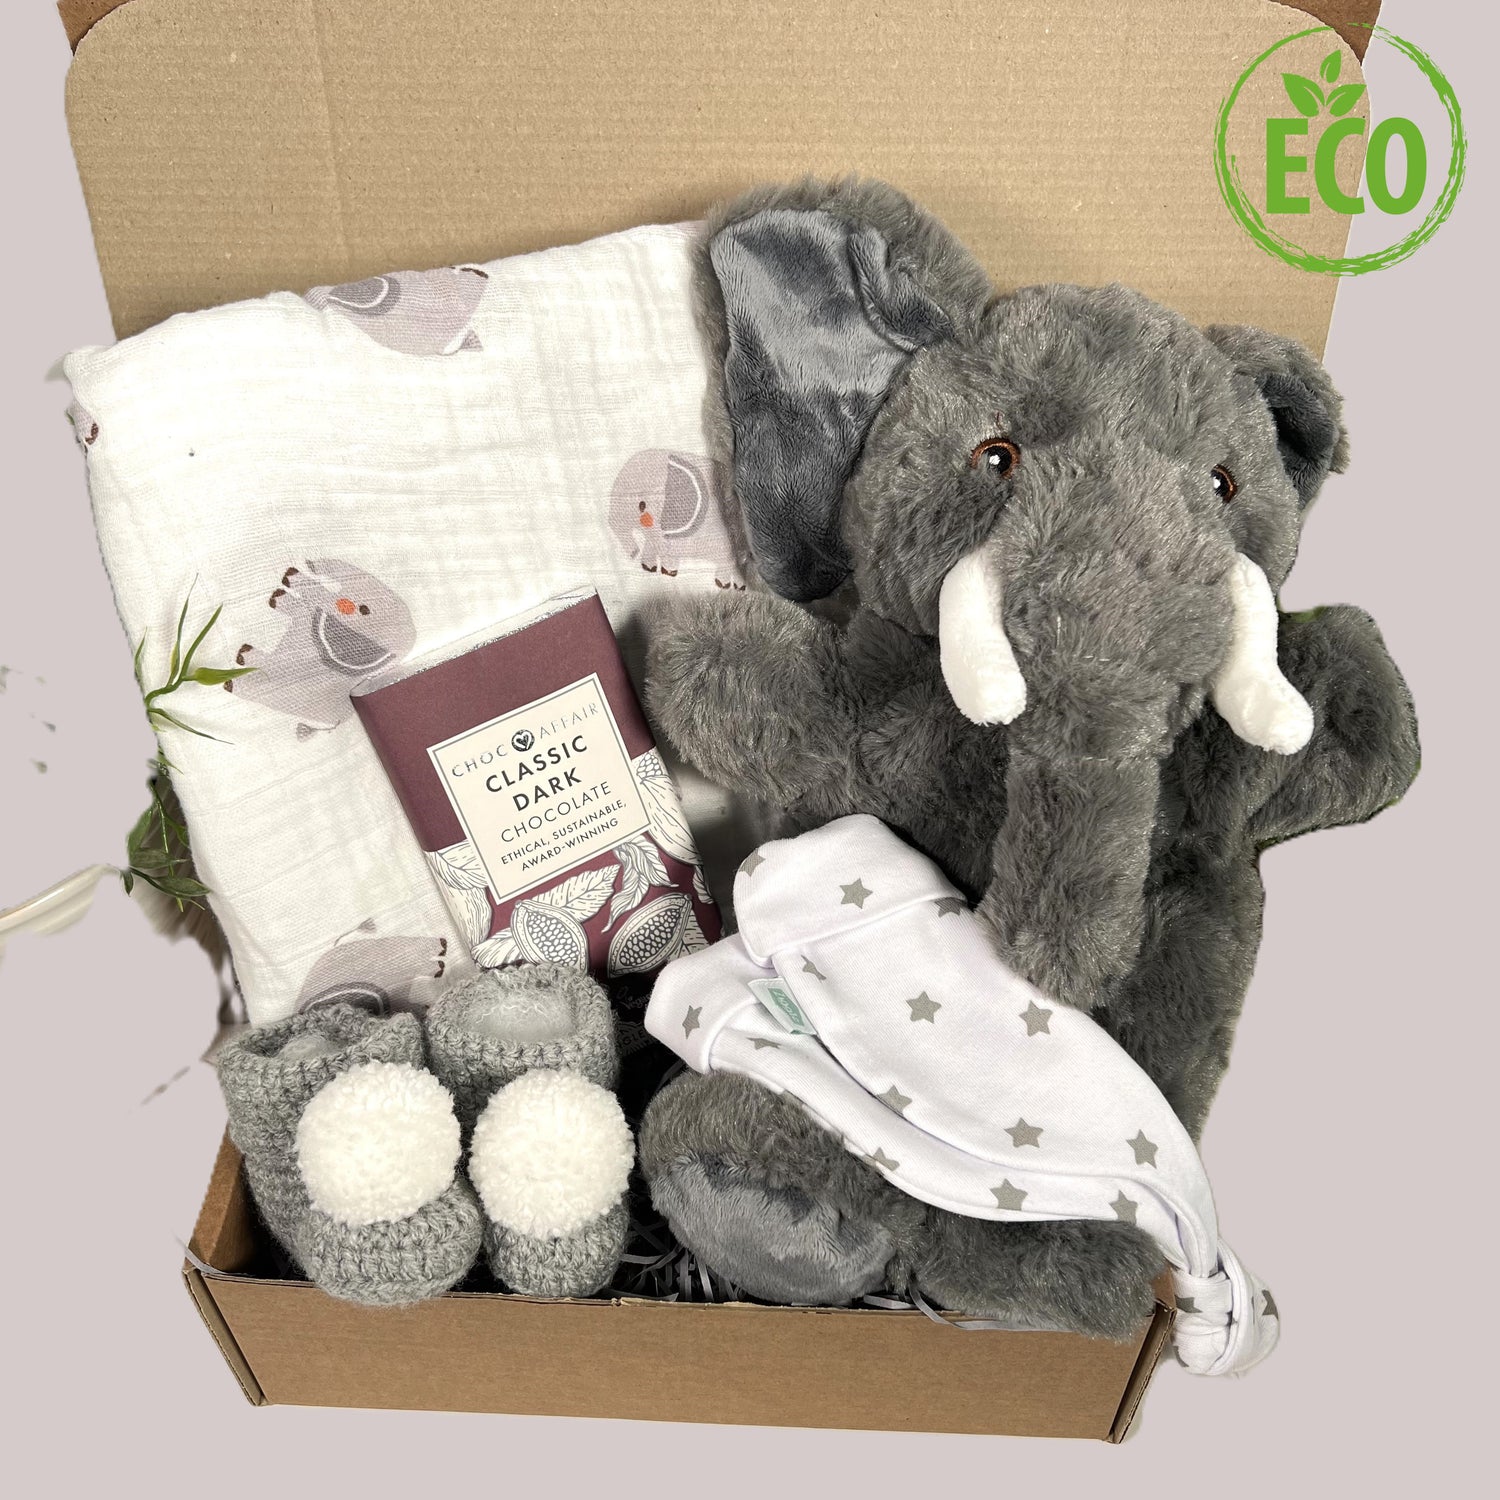 A baby hamper containing a grey elephant puppet made from recycled materials, a white baby knot hat with a grey stars print. A large white muslin square with an elephant print, a pair of crocheted baby bootees in grey with white pom poms and a bar of handmade dark chocolate.